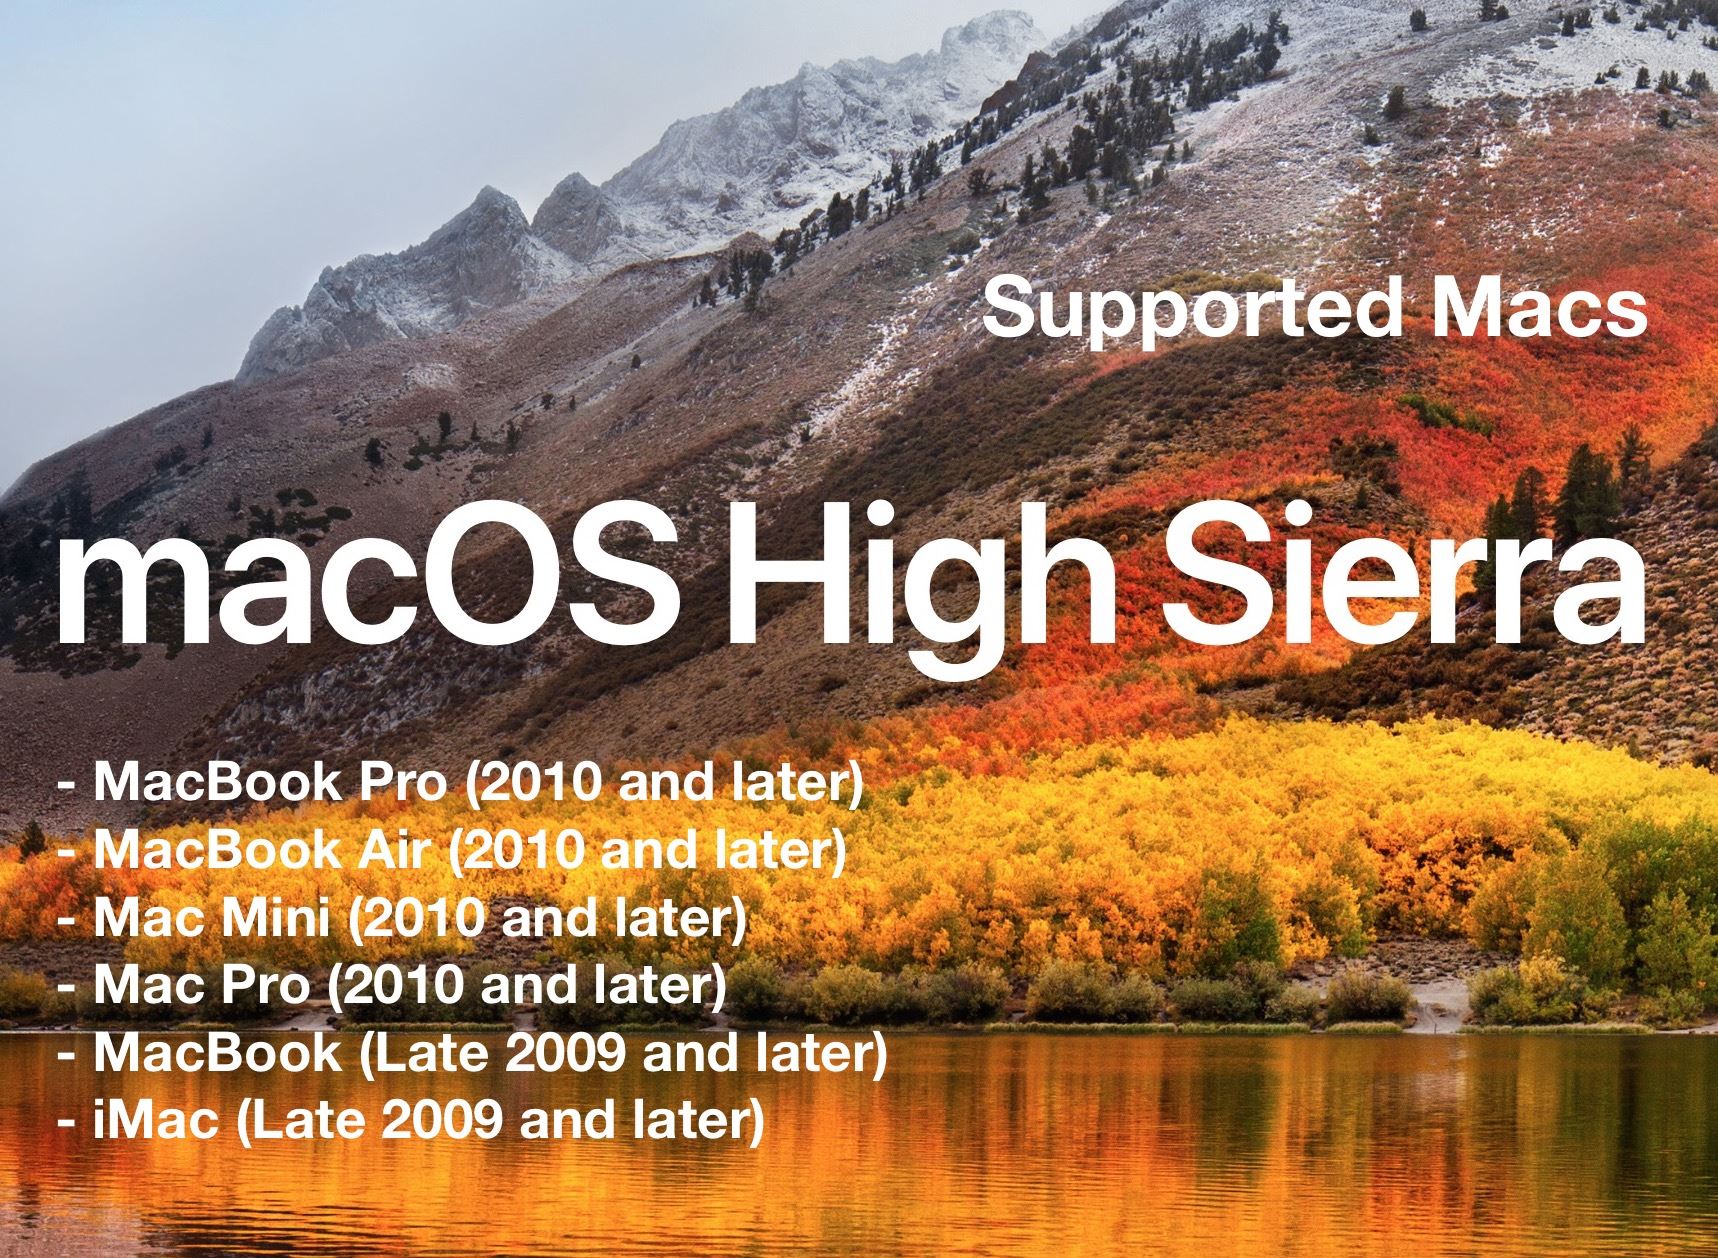 macOS High Sierra news, updates and features